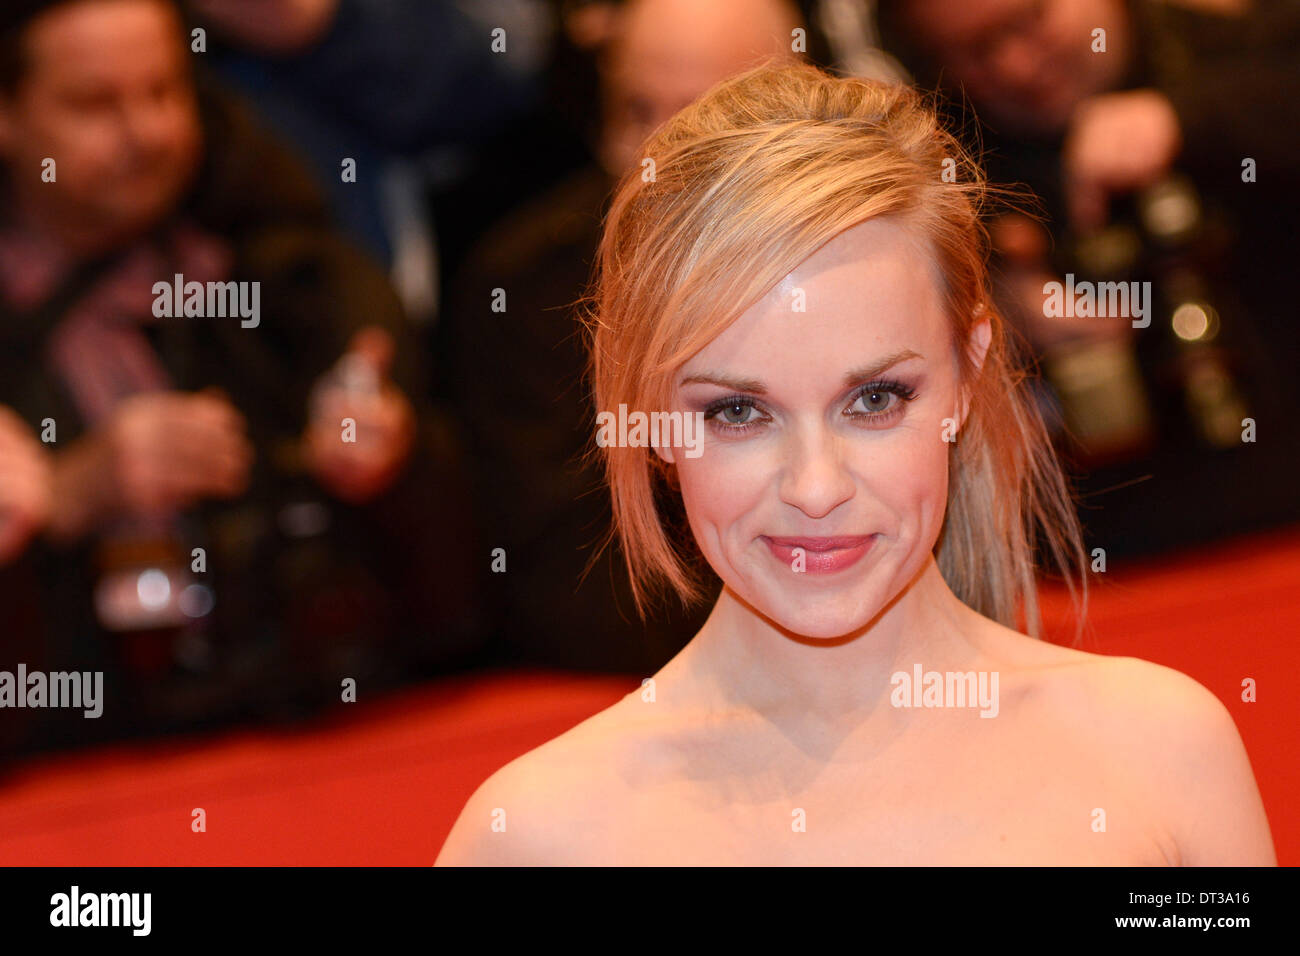 Berlin, Germany. 6th Feb, 2014. Friederike Kempter attending the 'The Grand Budapest Hotel' premiere at the 64th Berlin International Film Festival / Berlinale 2014 on February 6, 2014 in Berlin, Germany. Credit:  dpa/Alamy Live News Stock Photo